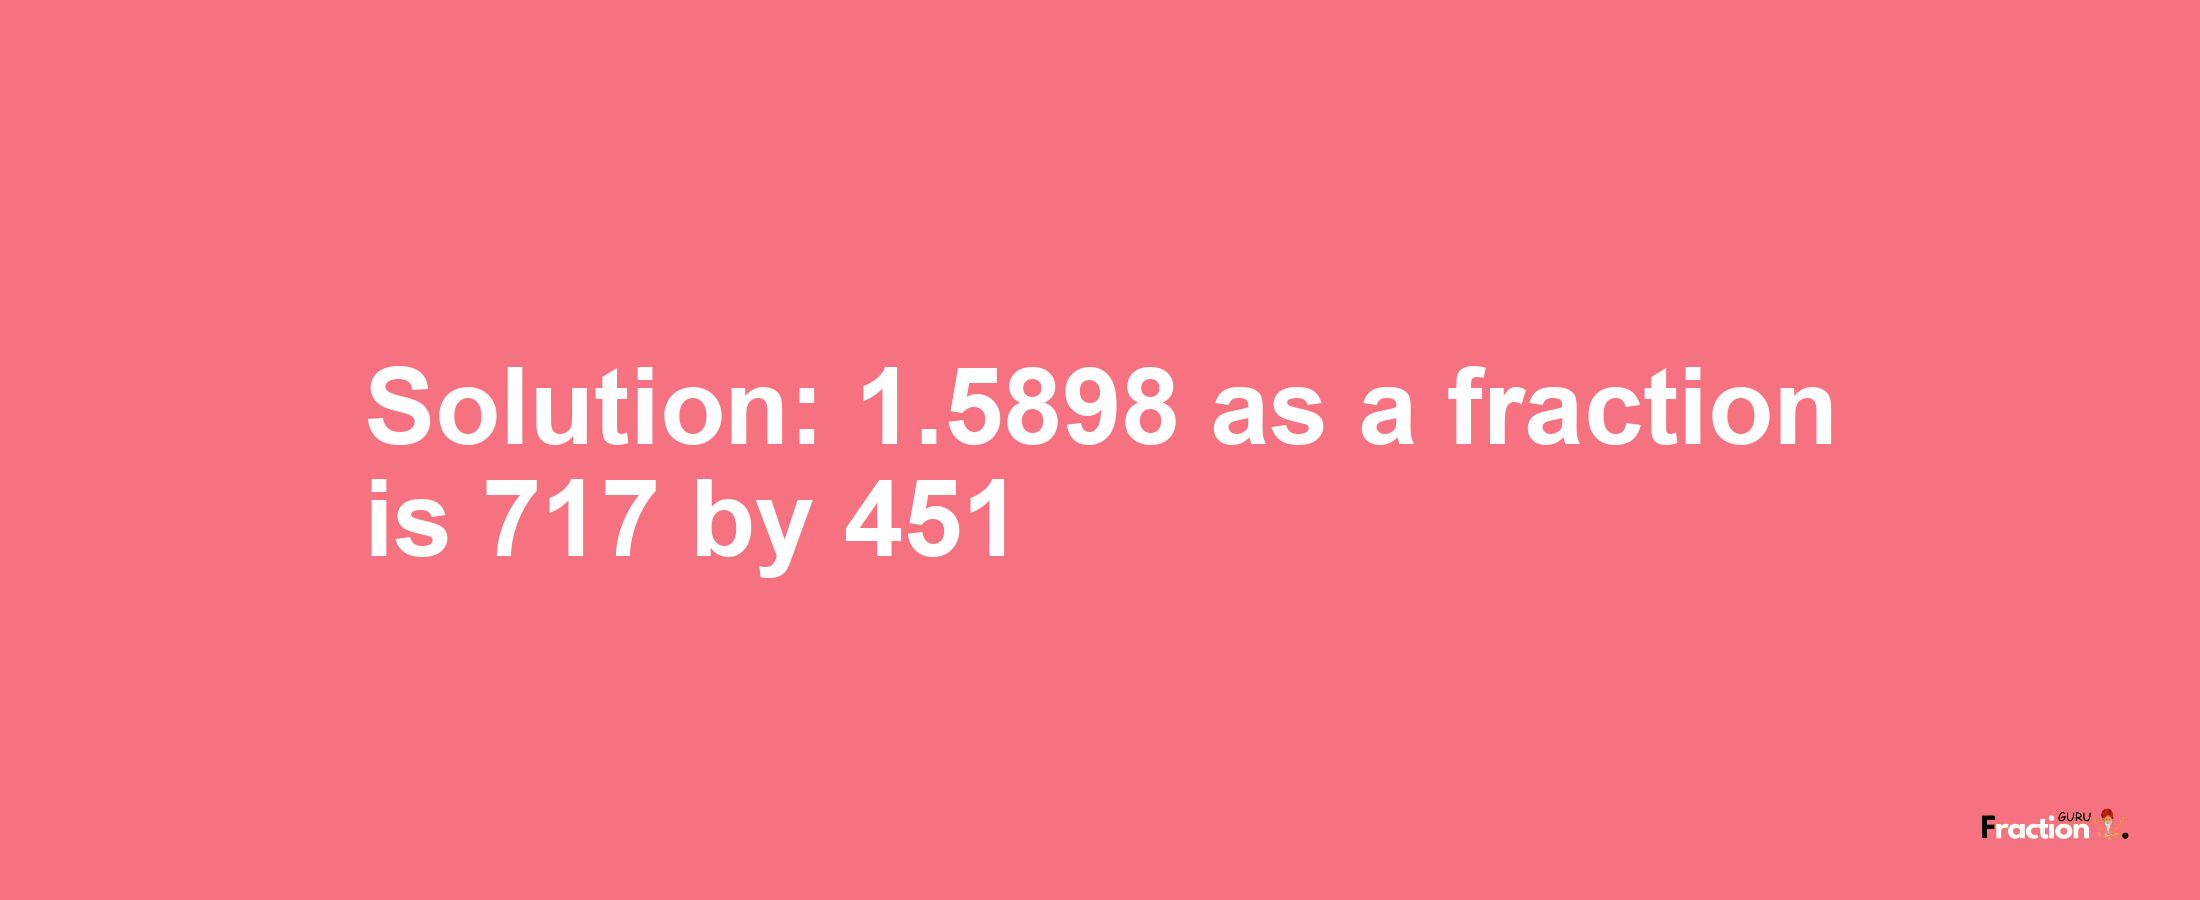 Solution:1.5898 as a fraction is 717/451